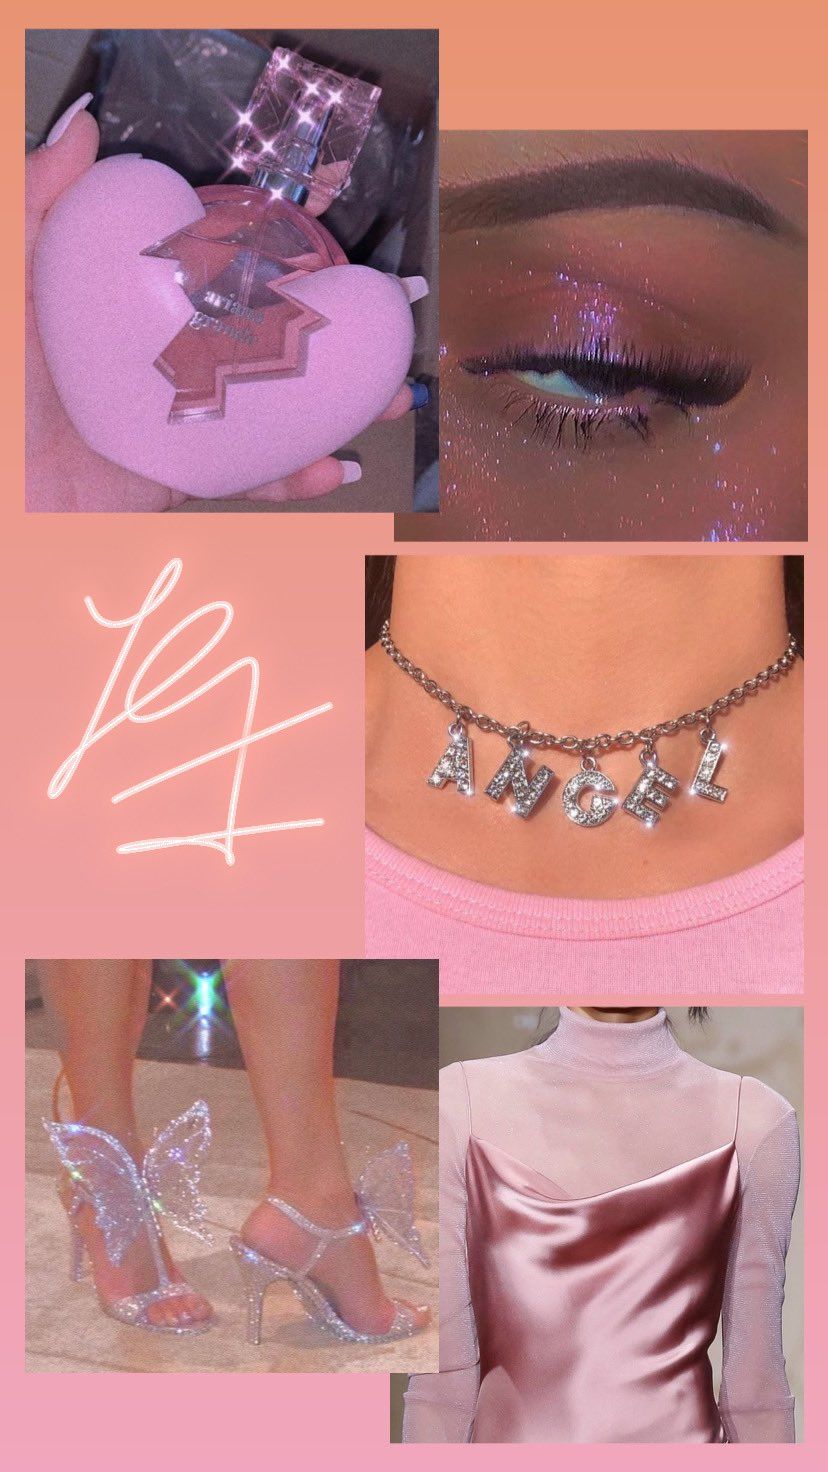 Collage of pink and silver images including a heart shaped compact, eye makeup, necklace, shoes and a pink top - Bling